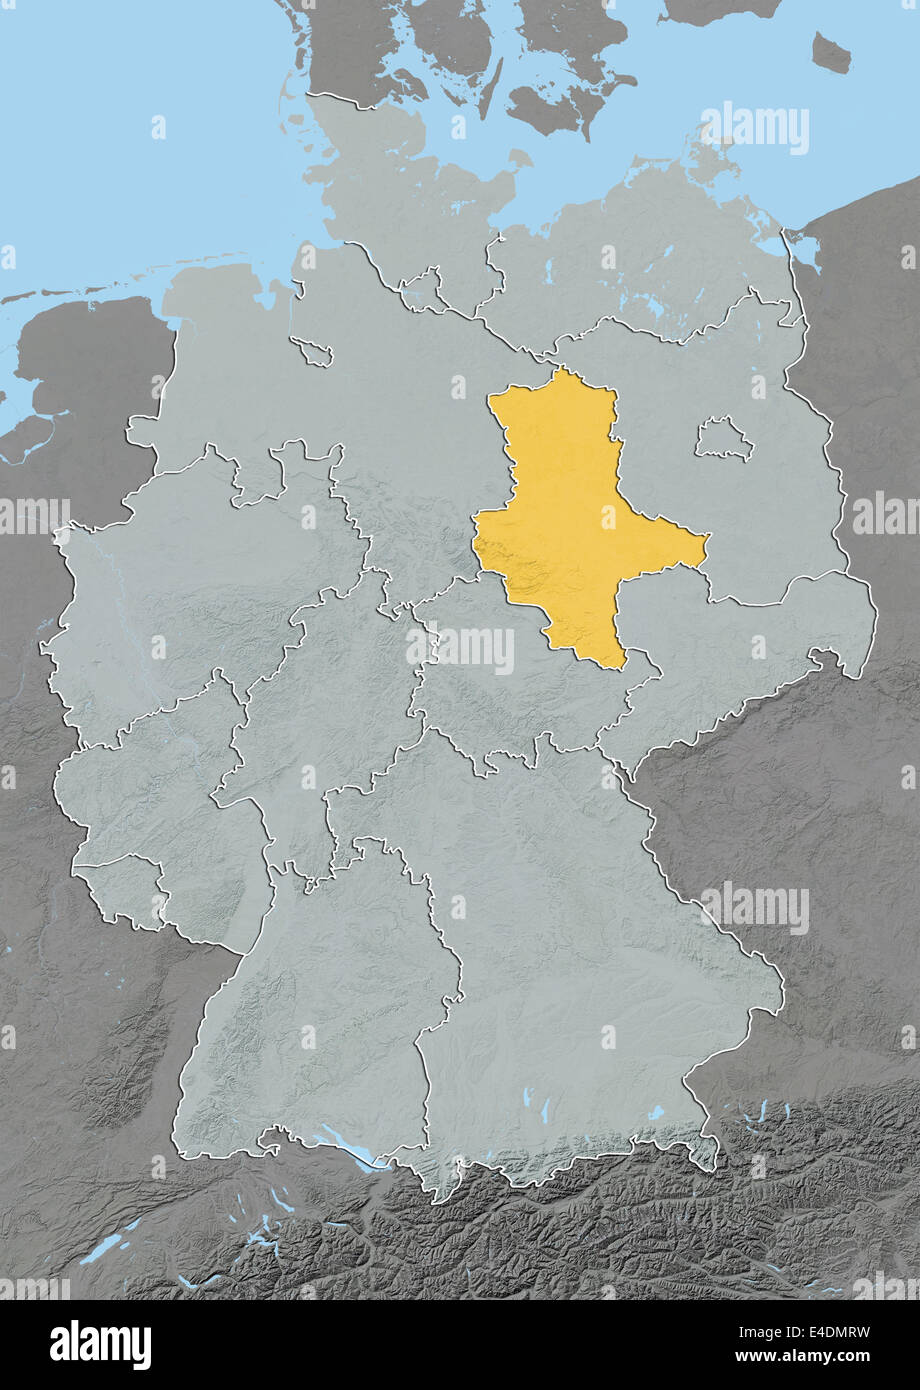 State of Saxony-Anhalt, Germany, Relief Map Stock Photo